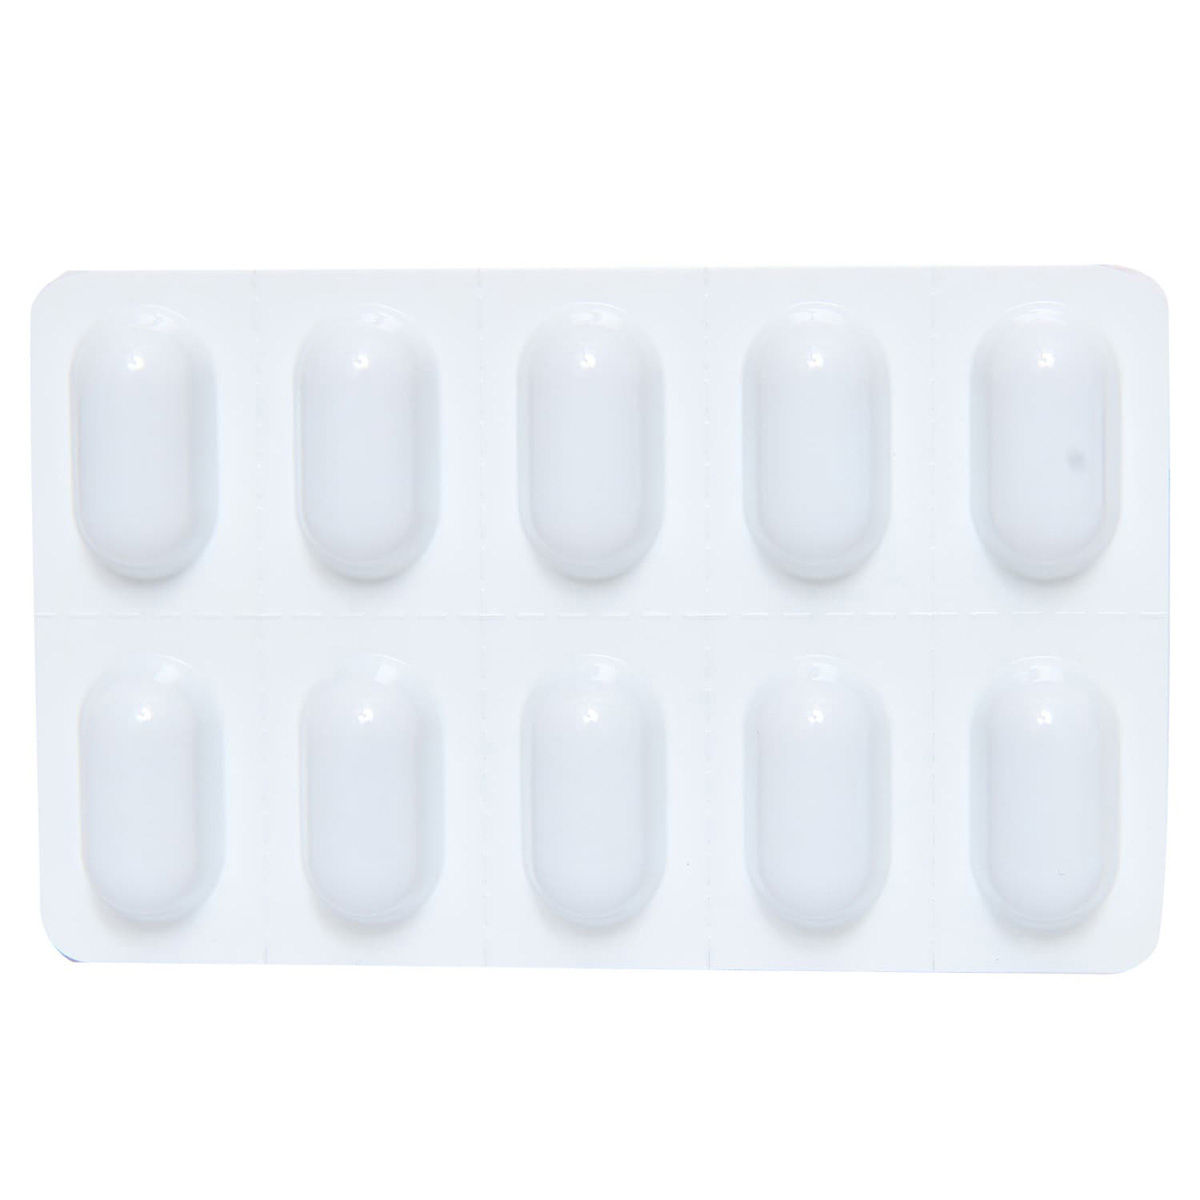 Jardiance Met 12.5 mg/1000 mg Tablet 10's Price, Uses, Side Effects ...